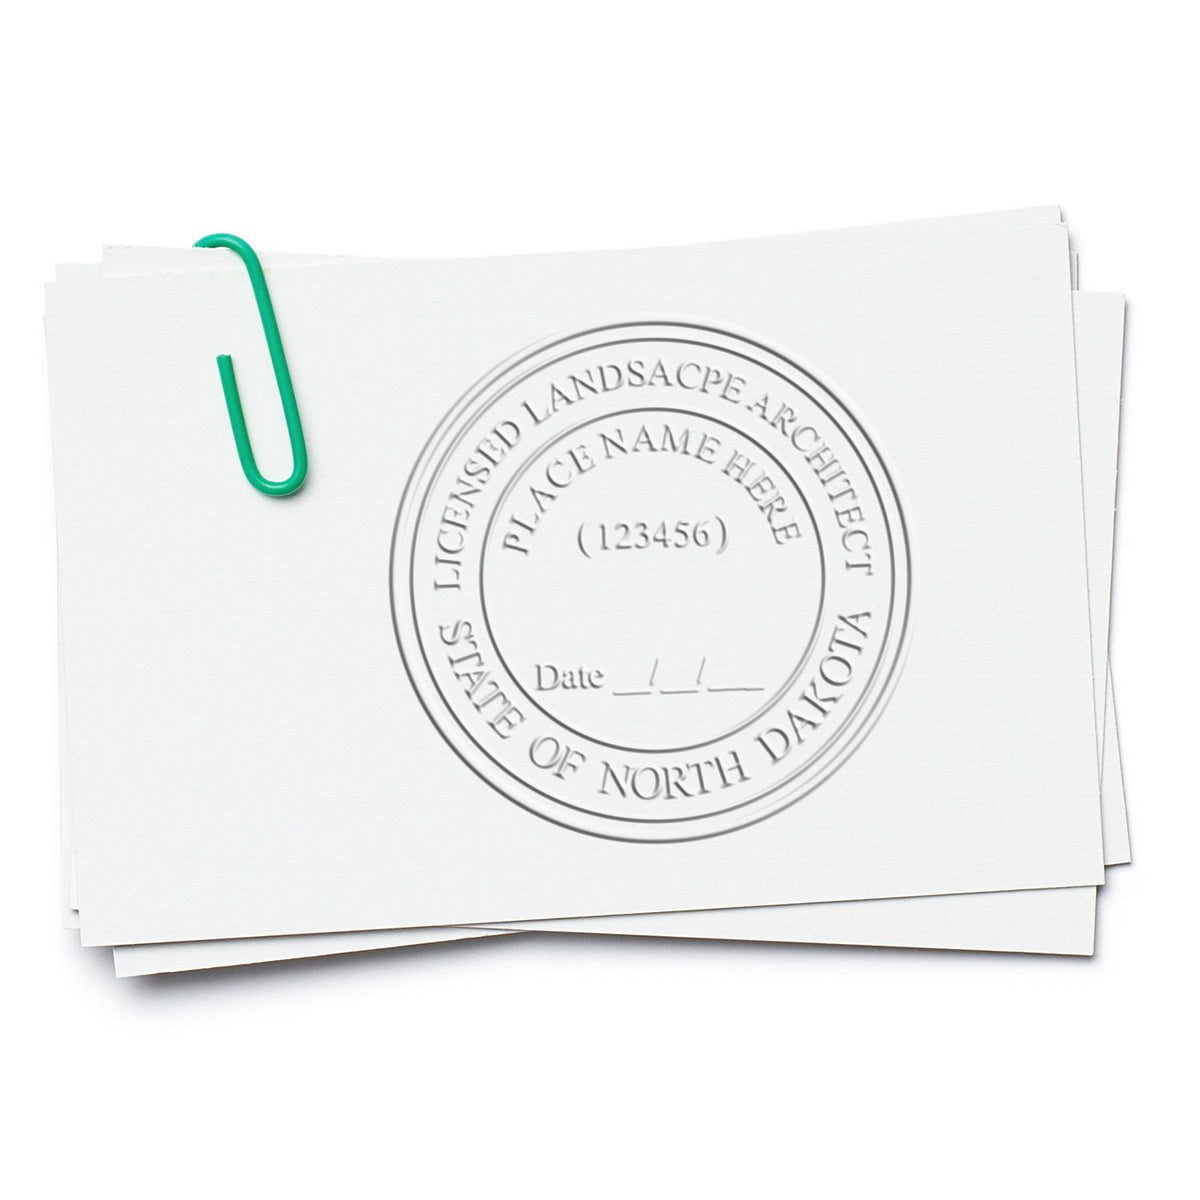 An alternative view of the Gift North Dakota Landscape Architect Seal stamped on a sheet of paper showing the image in use